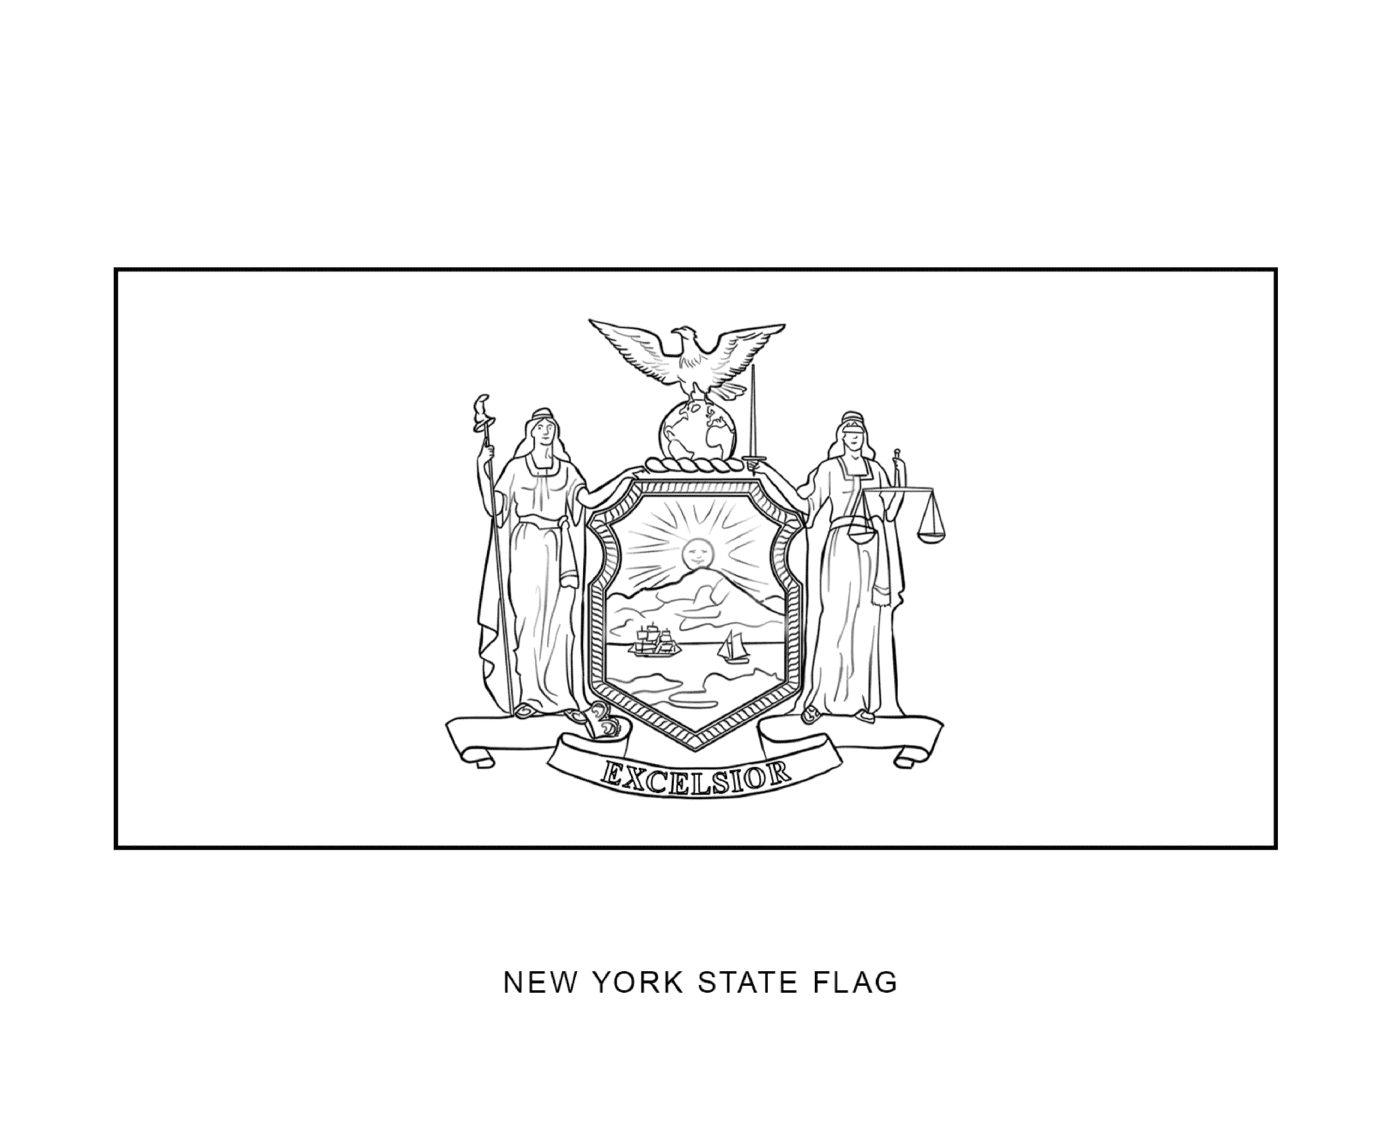  New York State flag drawn in black ink 